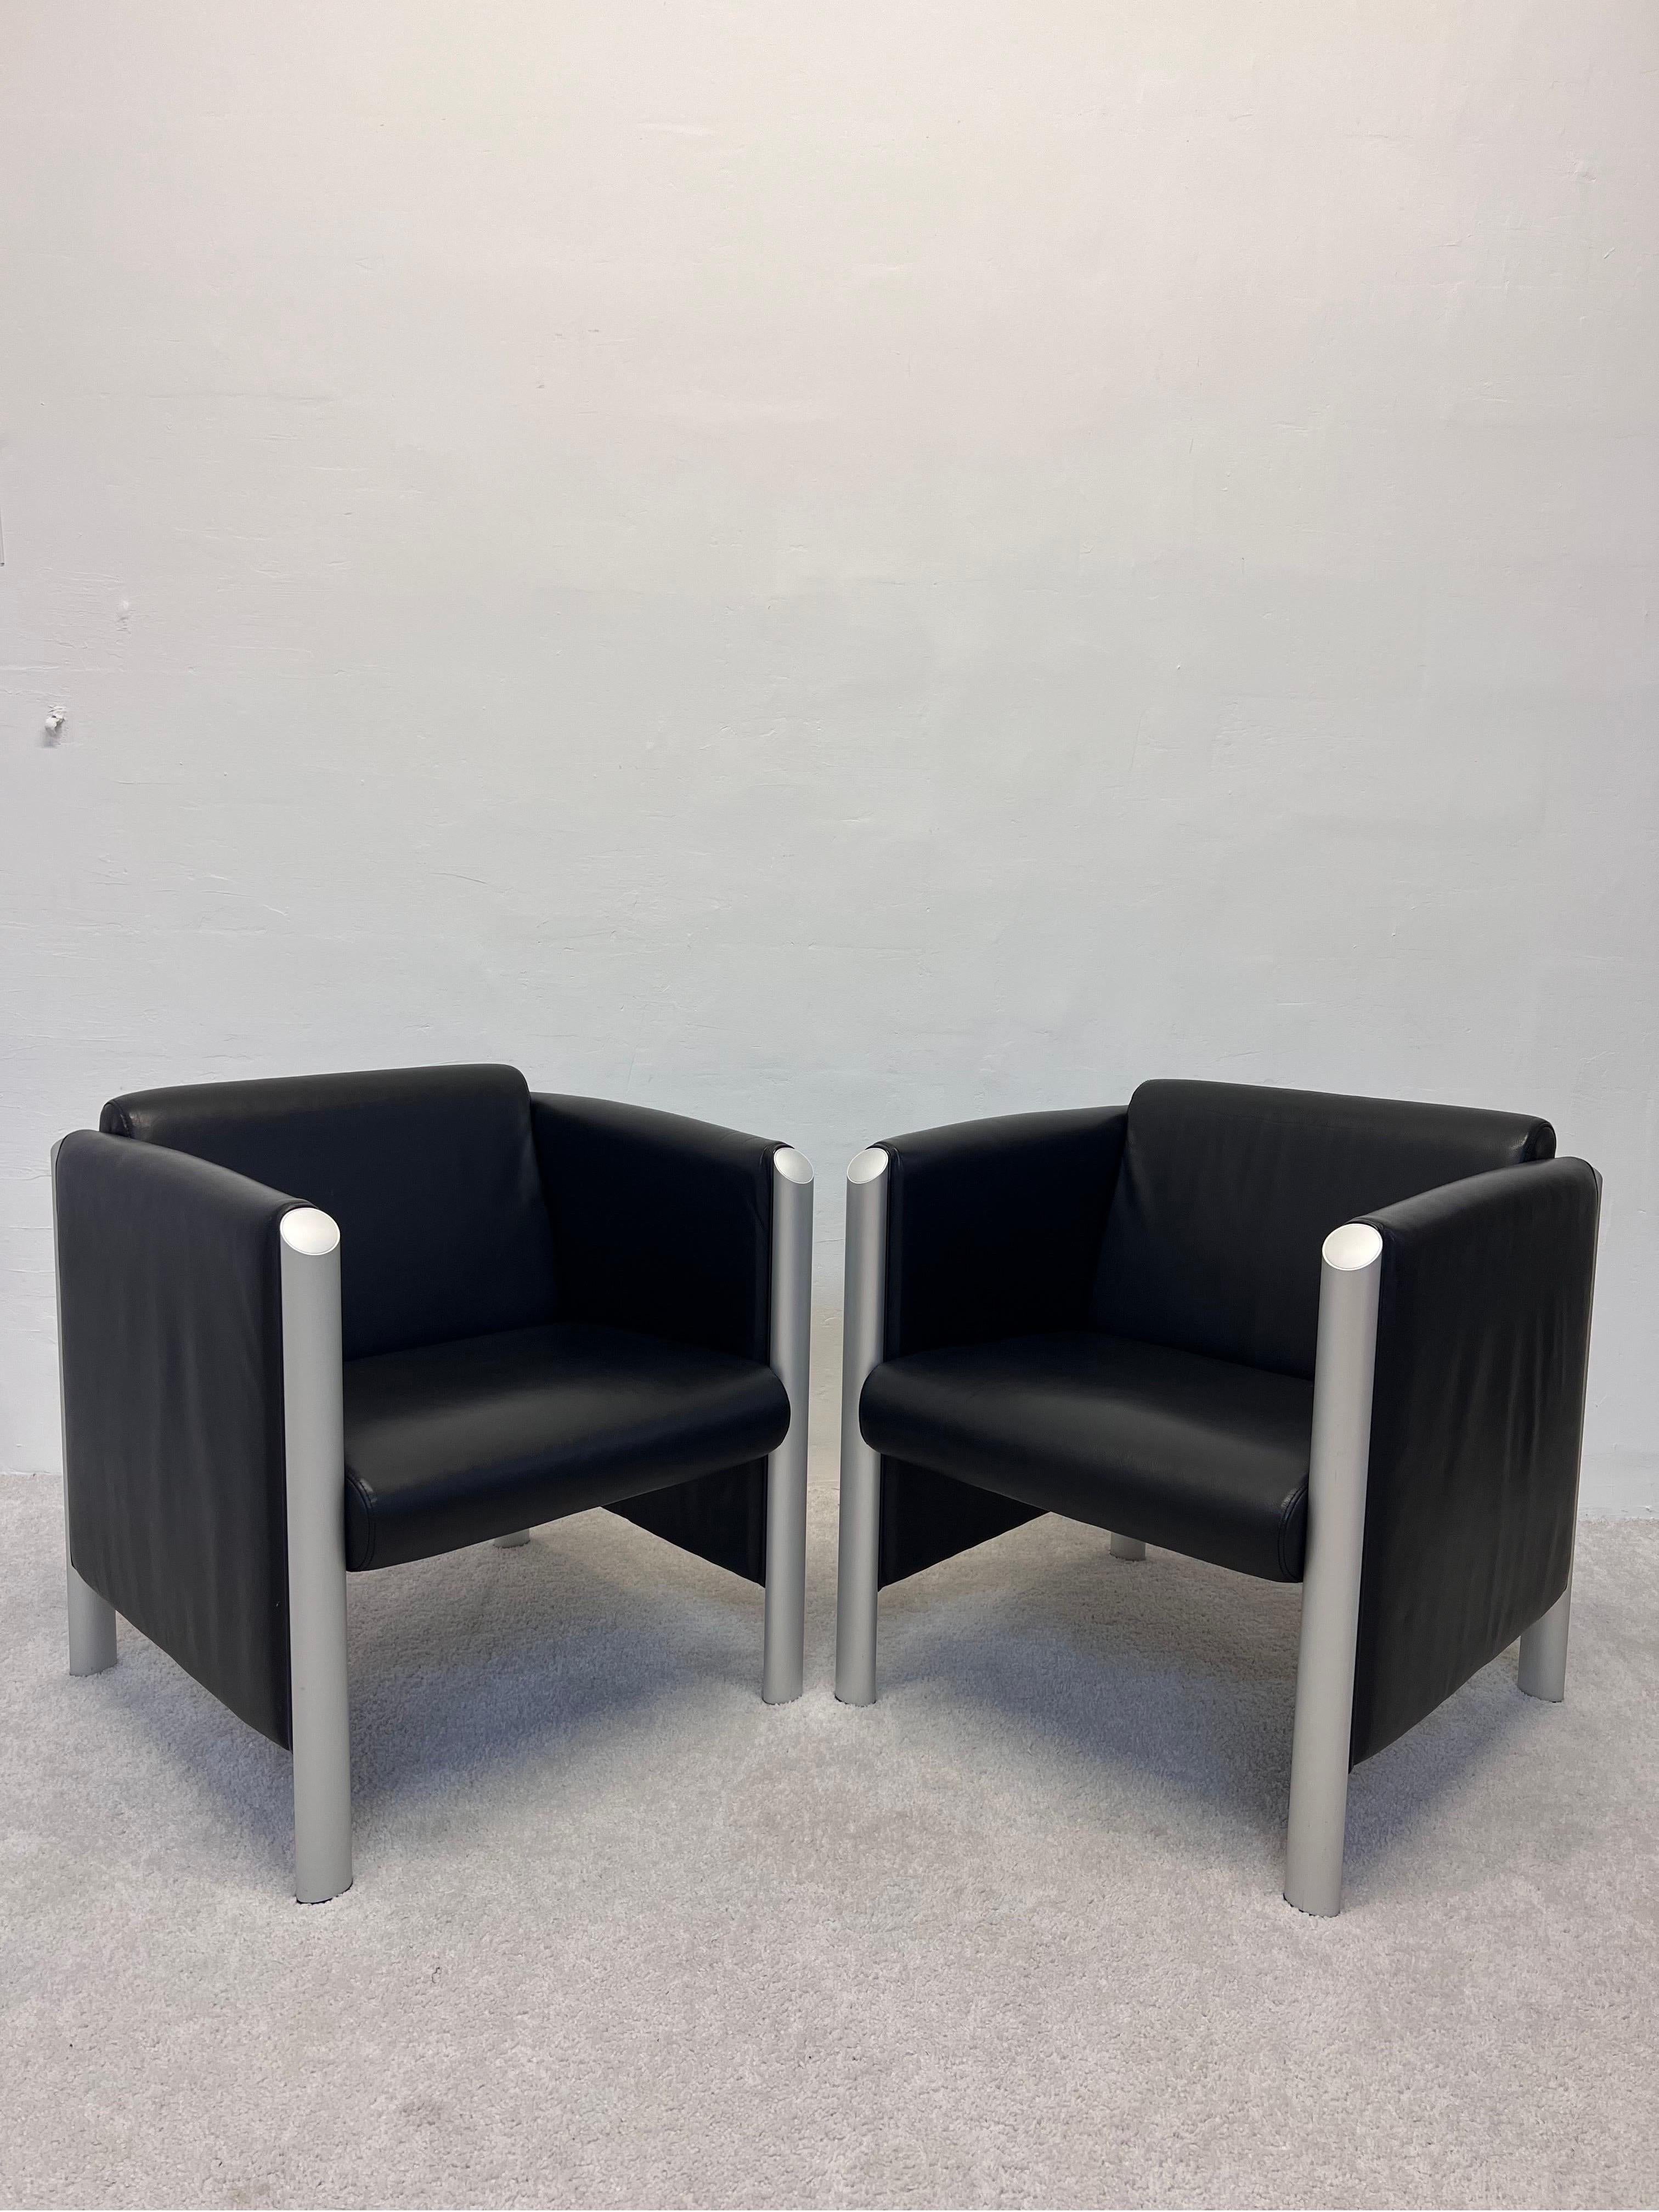 Pair of black leather Cubis chairs designed by Klaus Franck and Werner Sauer for Wilkhahn. Germany 1990s.

